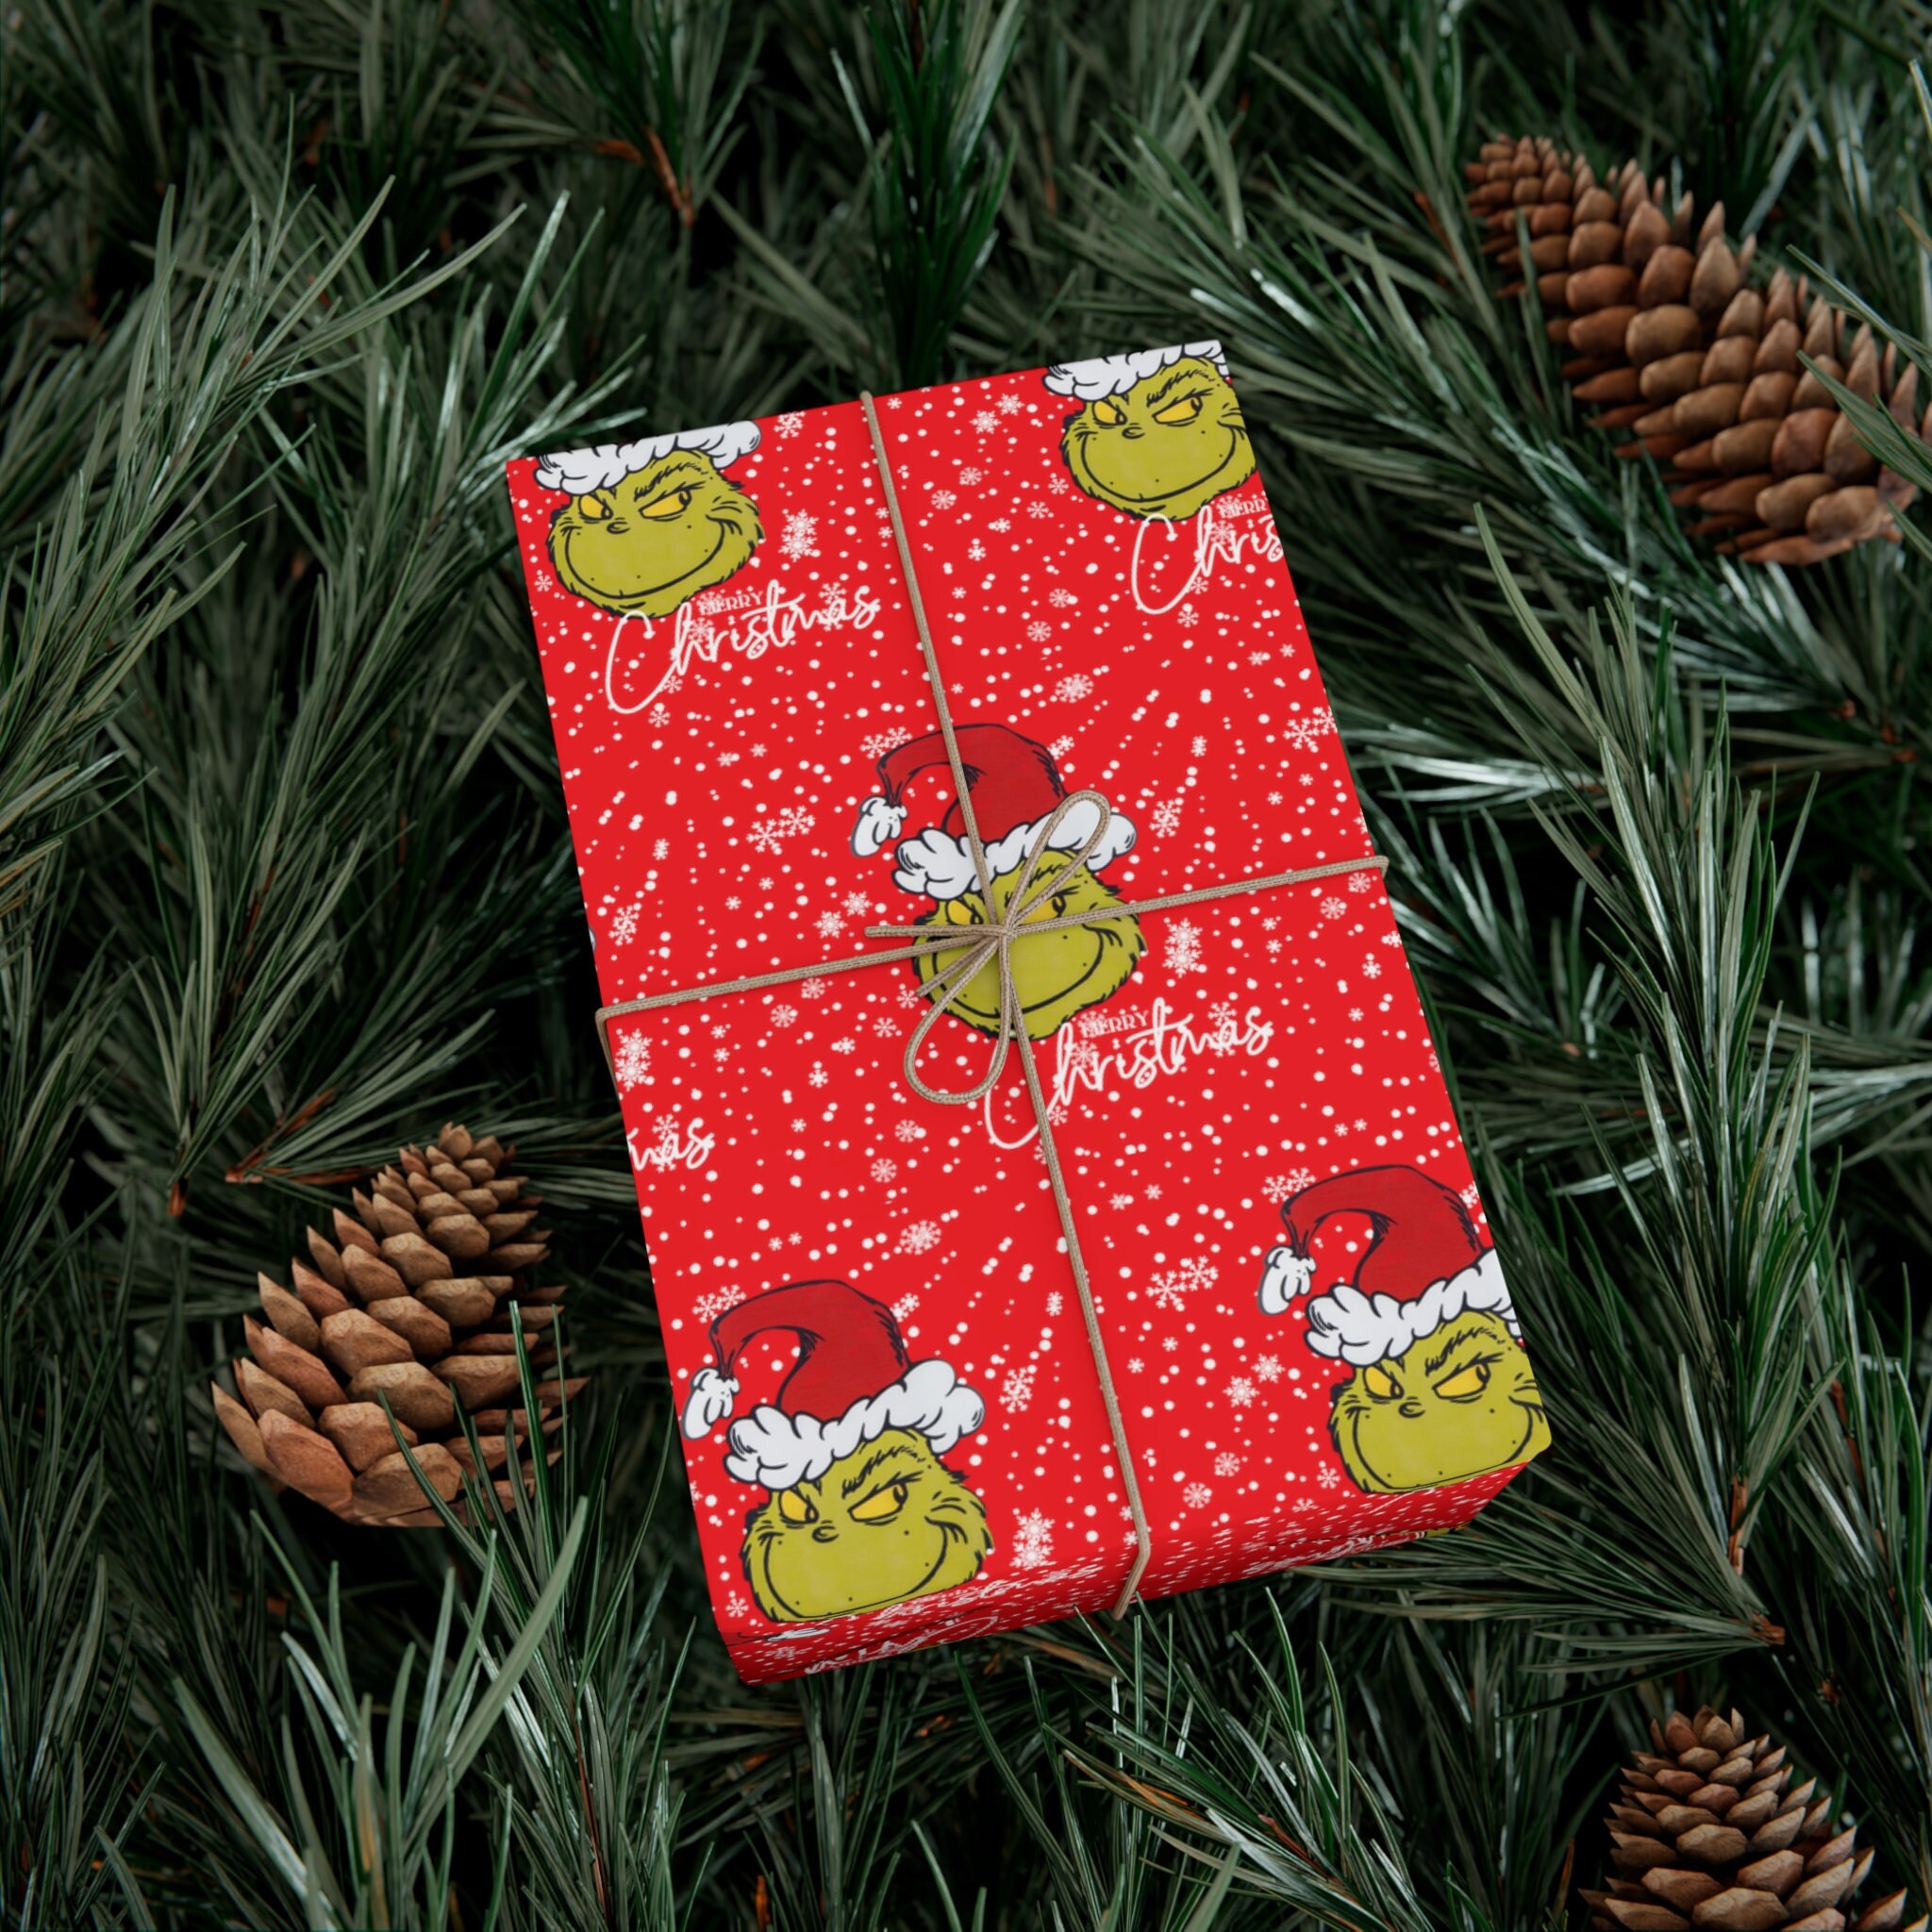 Dr. Seuss™ Grinch 3-Pack Christmas Wrapping Paper Assortment, 105